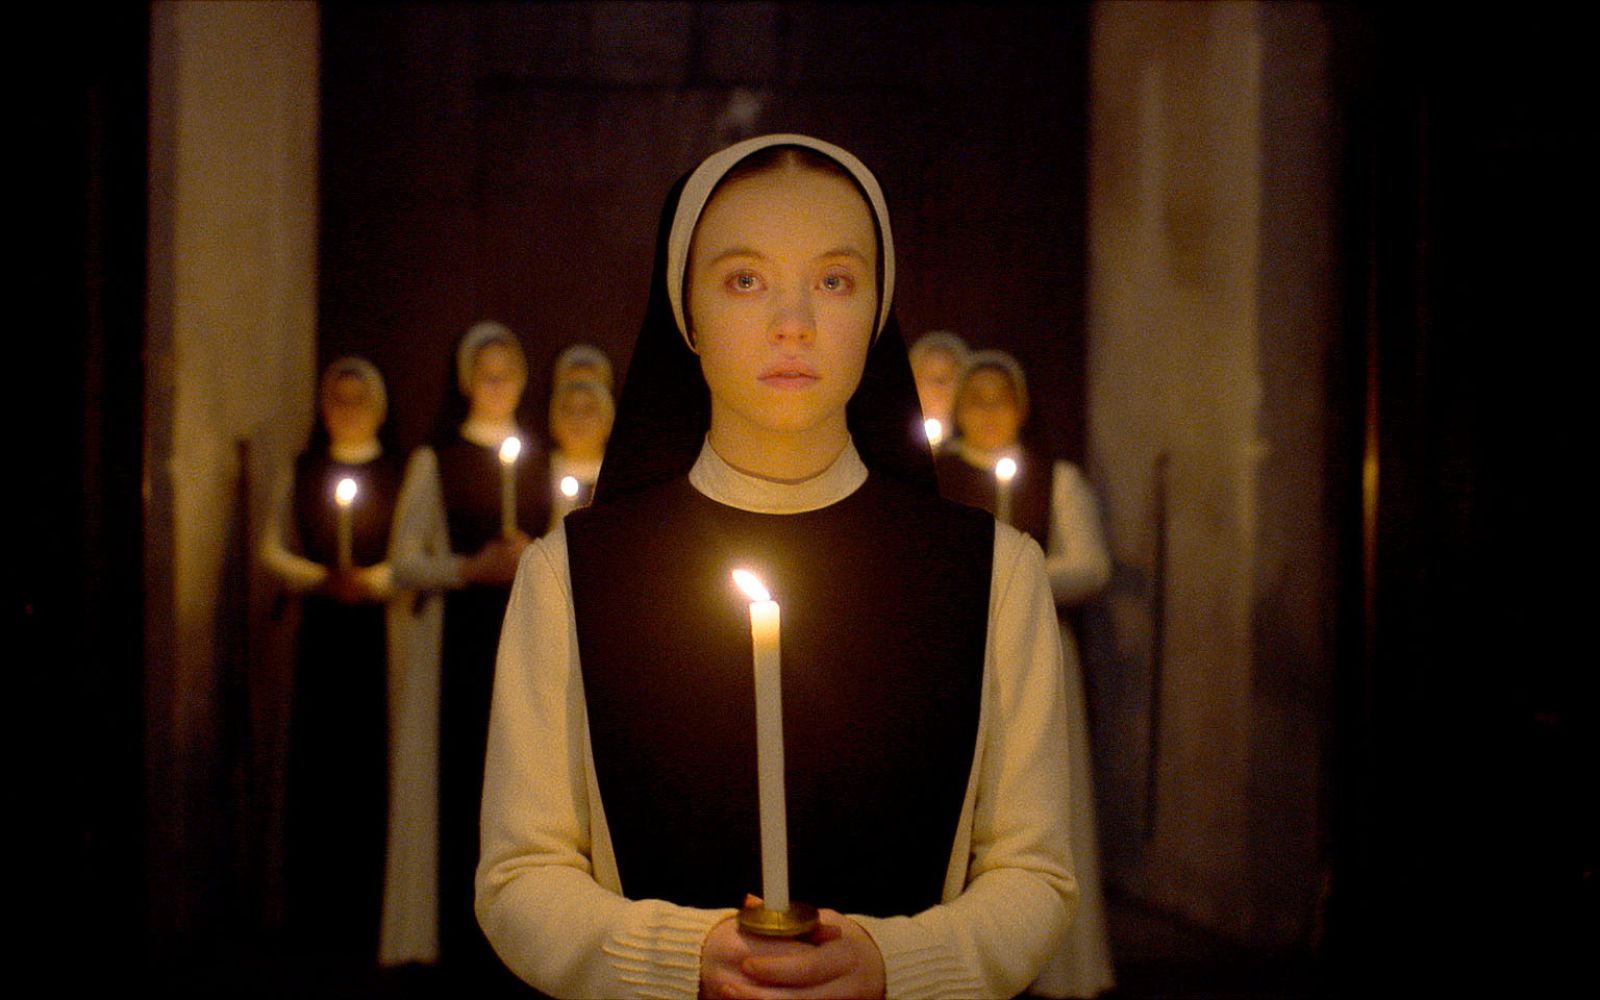 Sydney Sweeney stars in the new horror film "Immaculate."